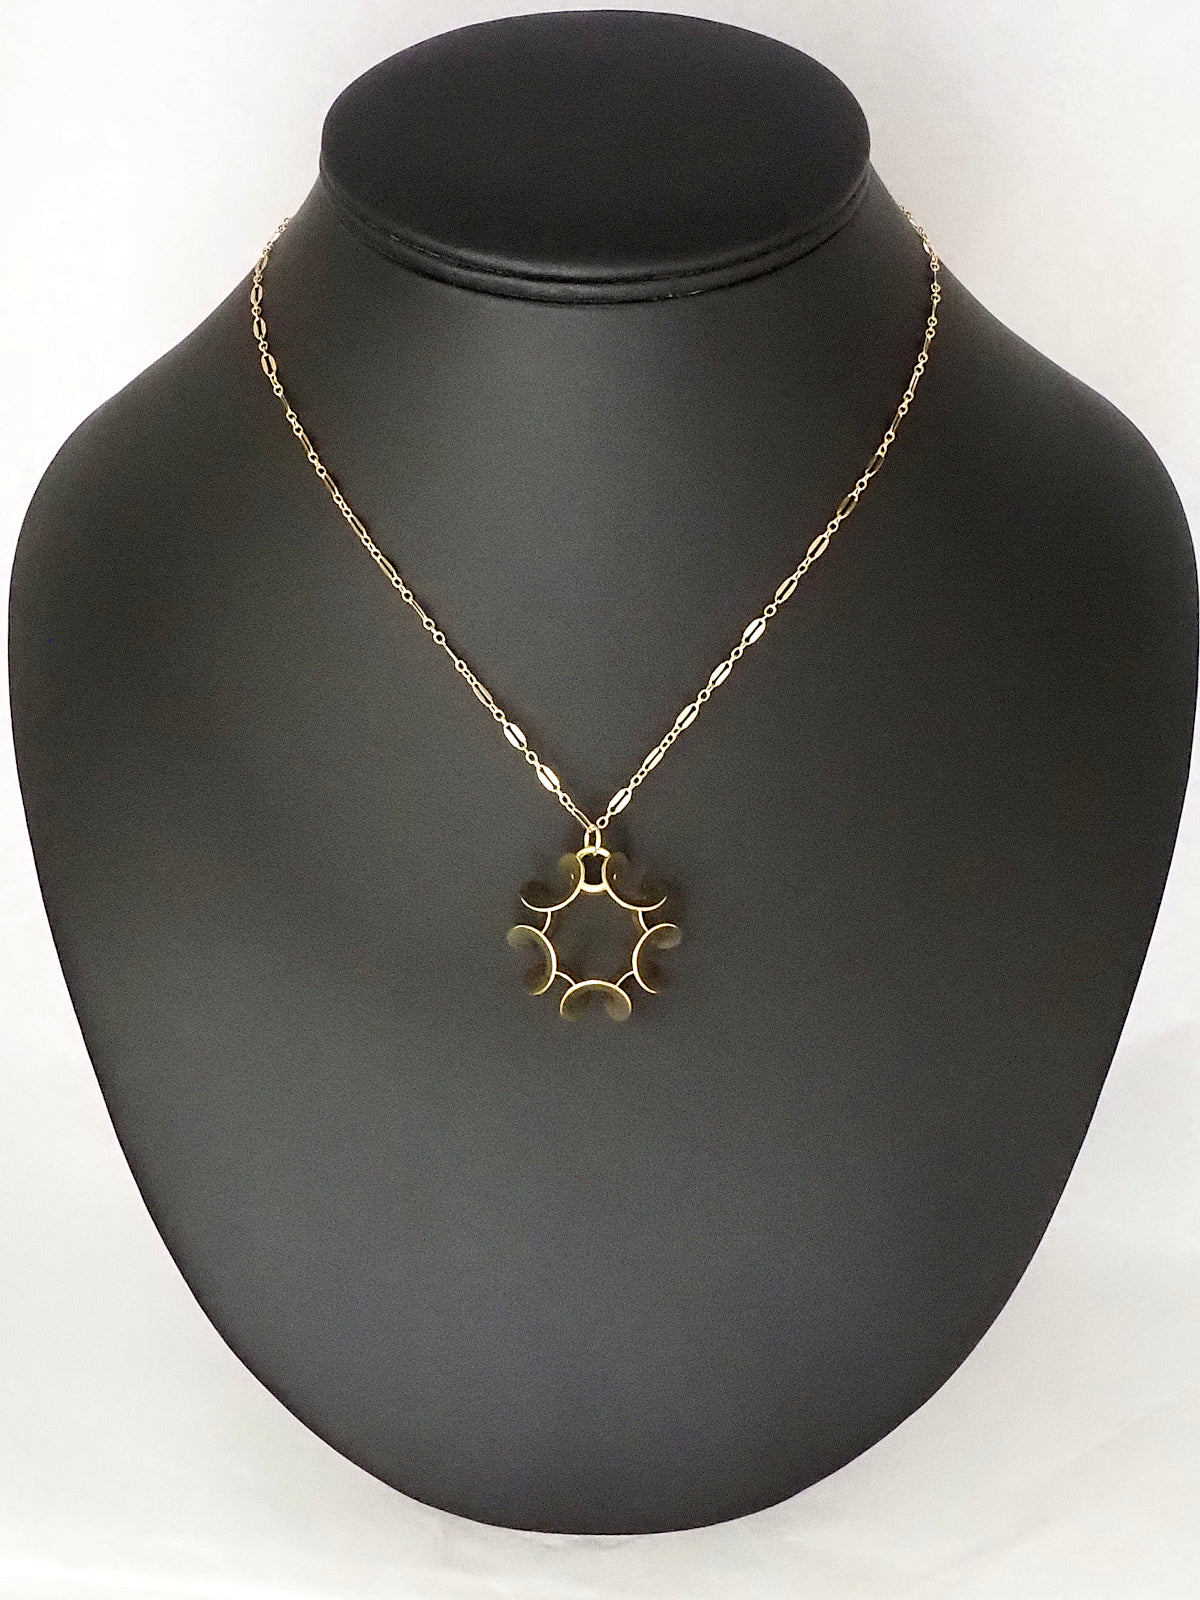 A gold-plated brass pendant in an abstract ruffled shape with five-fold rotational symmetry, with a gold-filled loop chain, on a necklace display.